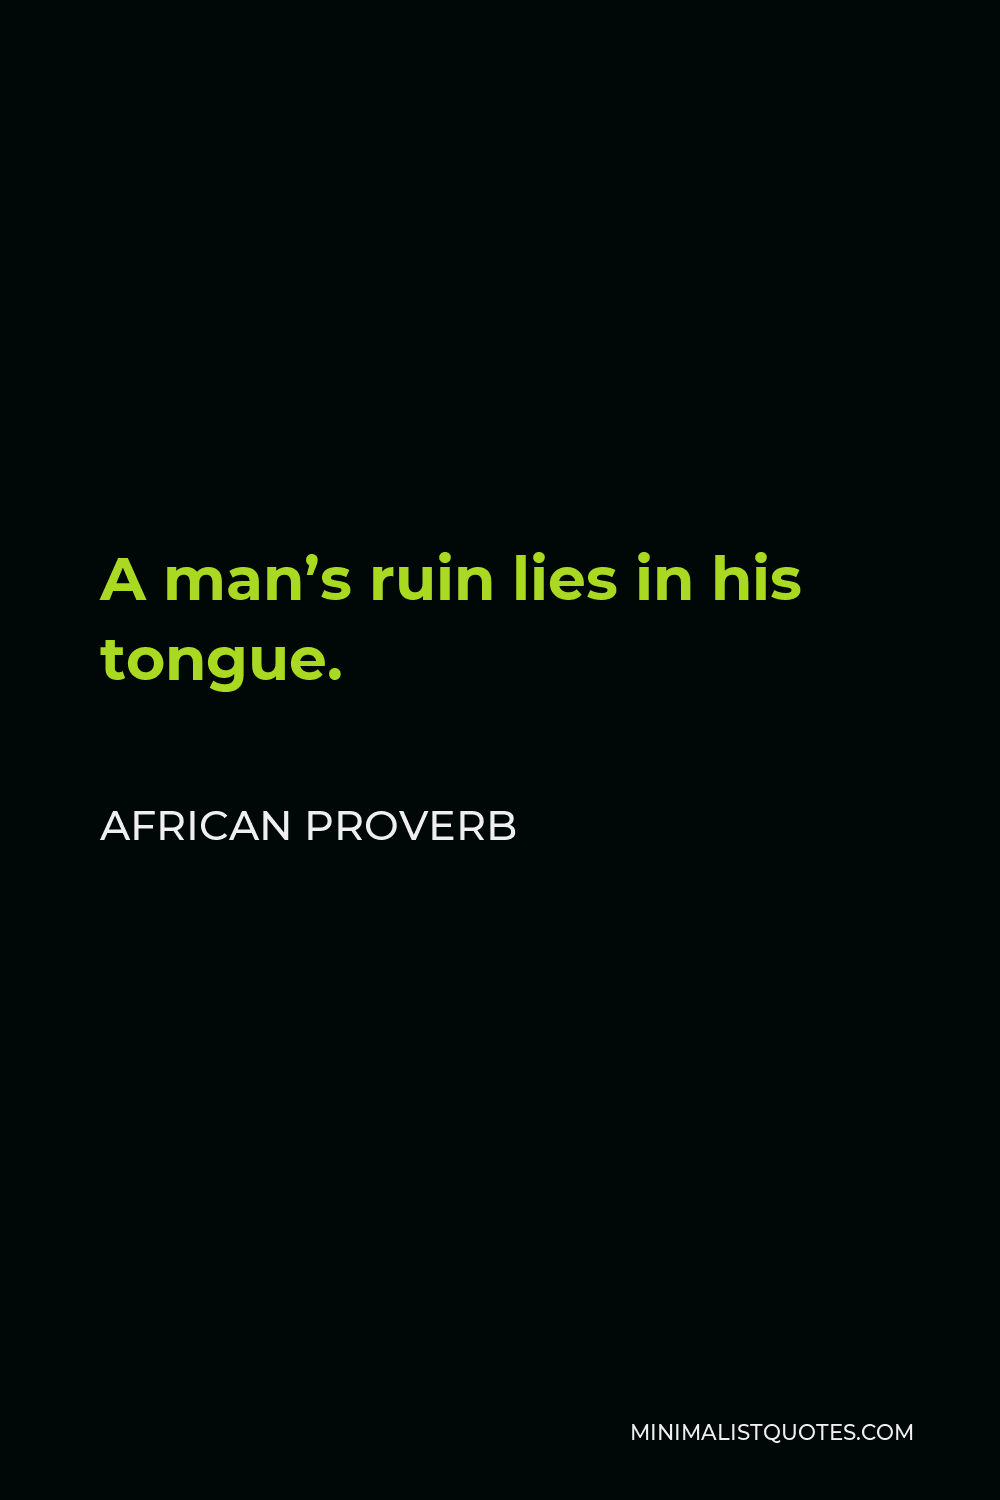 African Proverb Quote - A man’s ruin lies in his tongue.